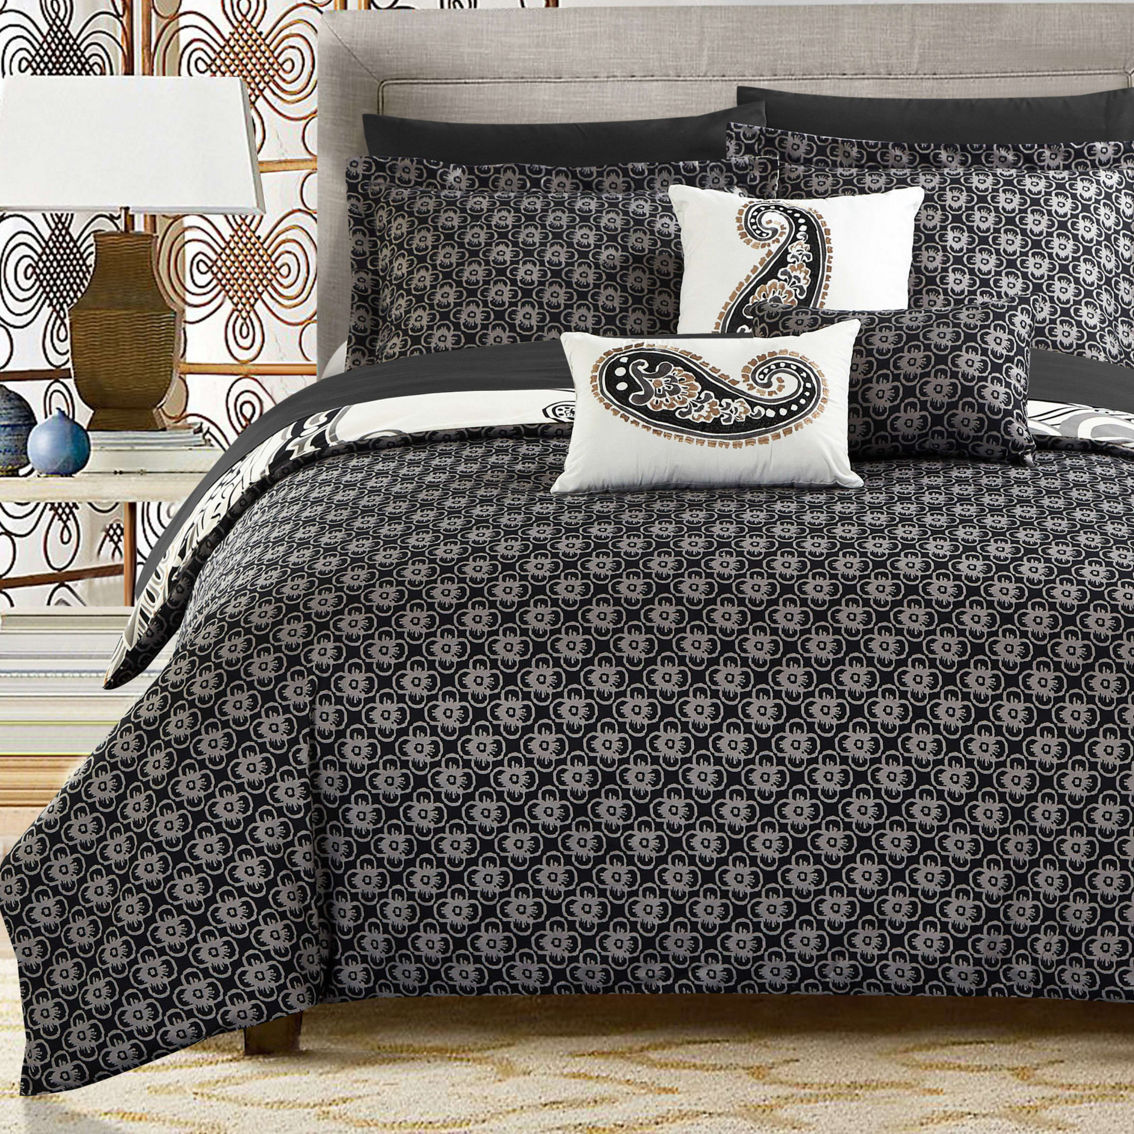 Chic Home Del Mar 8pc Comforter Set - Image 2 of 5